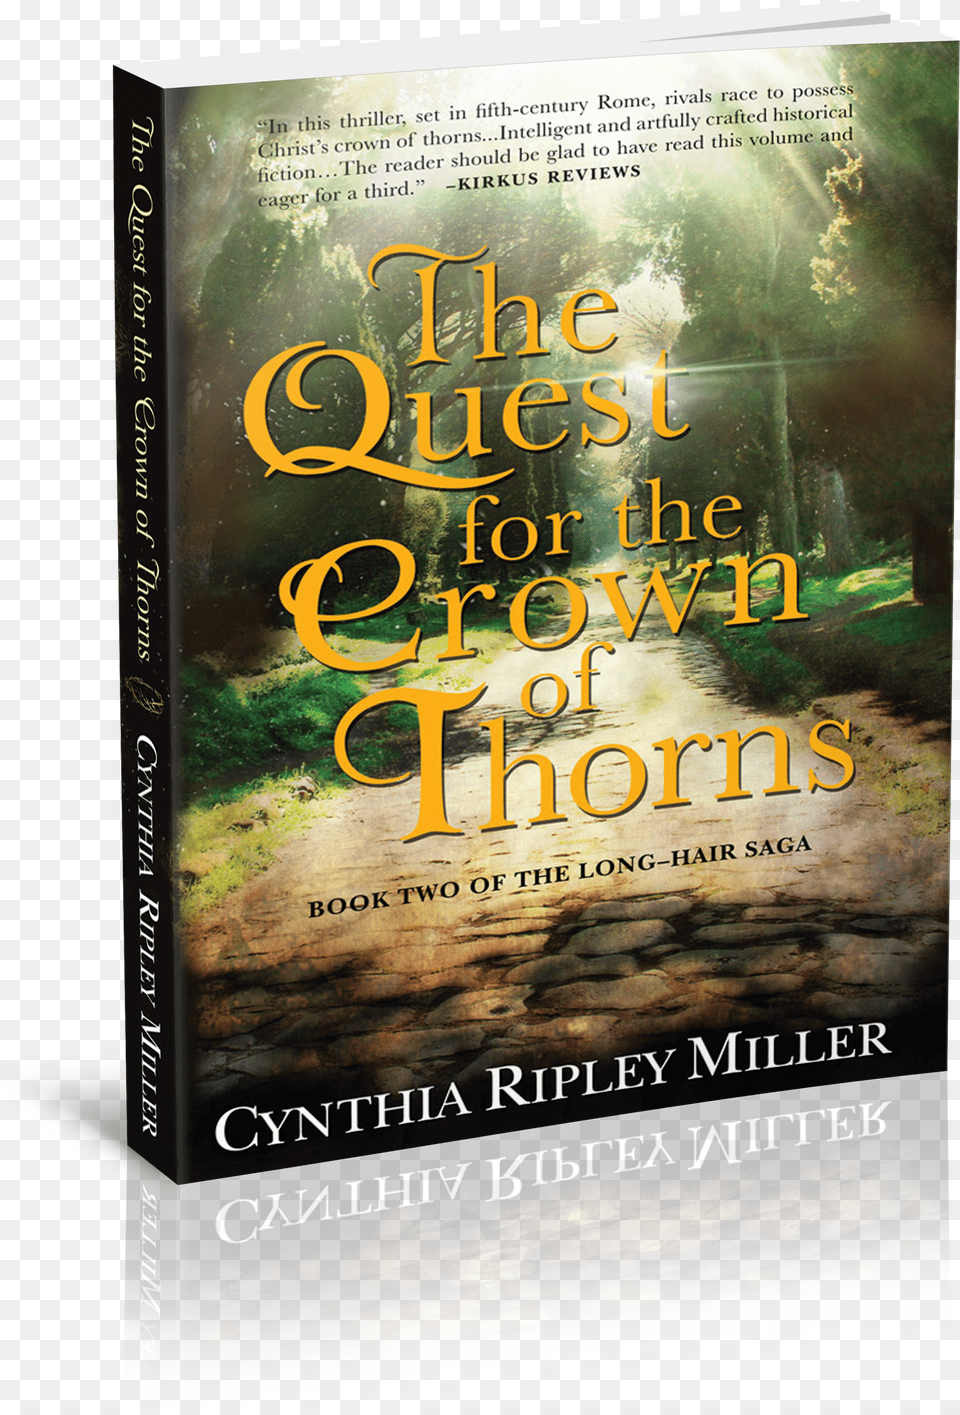 The Quest For Crown Of Thorns Cynthia Ripley Miller Book Cover Free Png Download